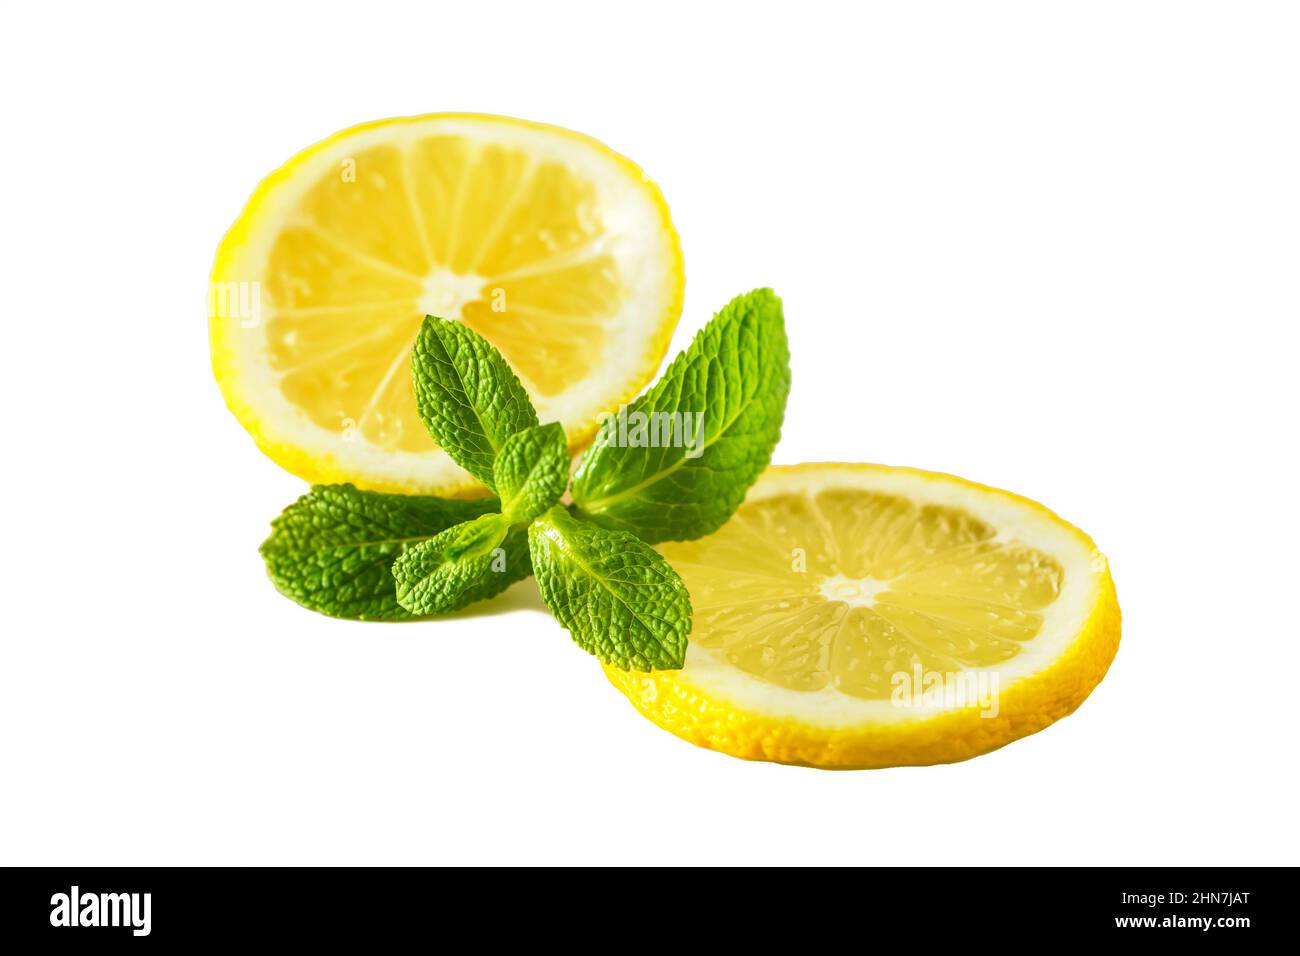 Fresh juicy lemon with mint on white background. Slice of ripe yellow citrus. Fruit high in vitamin C Stock Photo